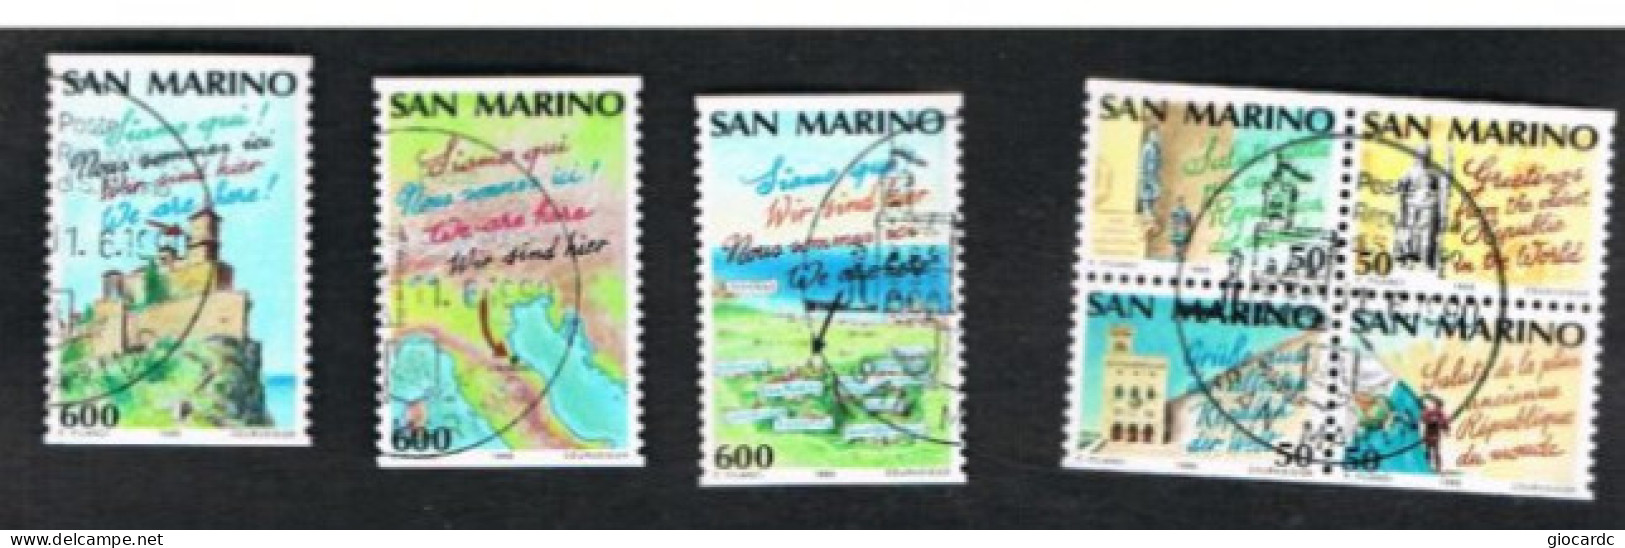 SAN MARINO UN 1289.1295  - 1990 ANNO DEL TURISMO (COMPLET SET OF 7 STAMPS, 4 SE-TENANT - BY BOOKLET)  - USED - Used Stamps